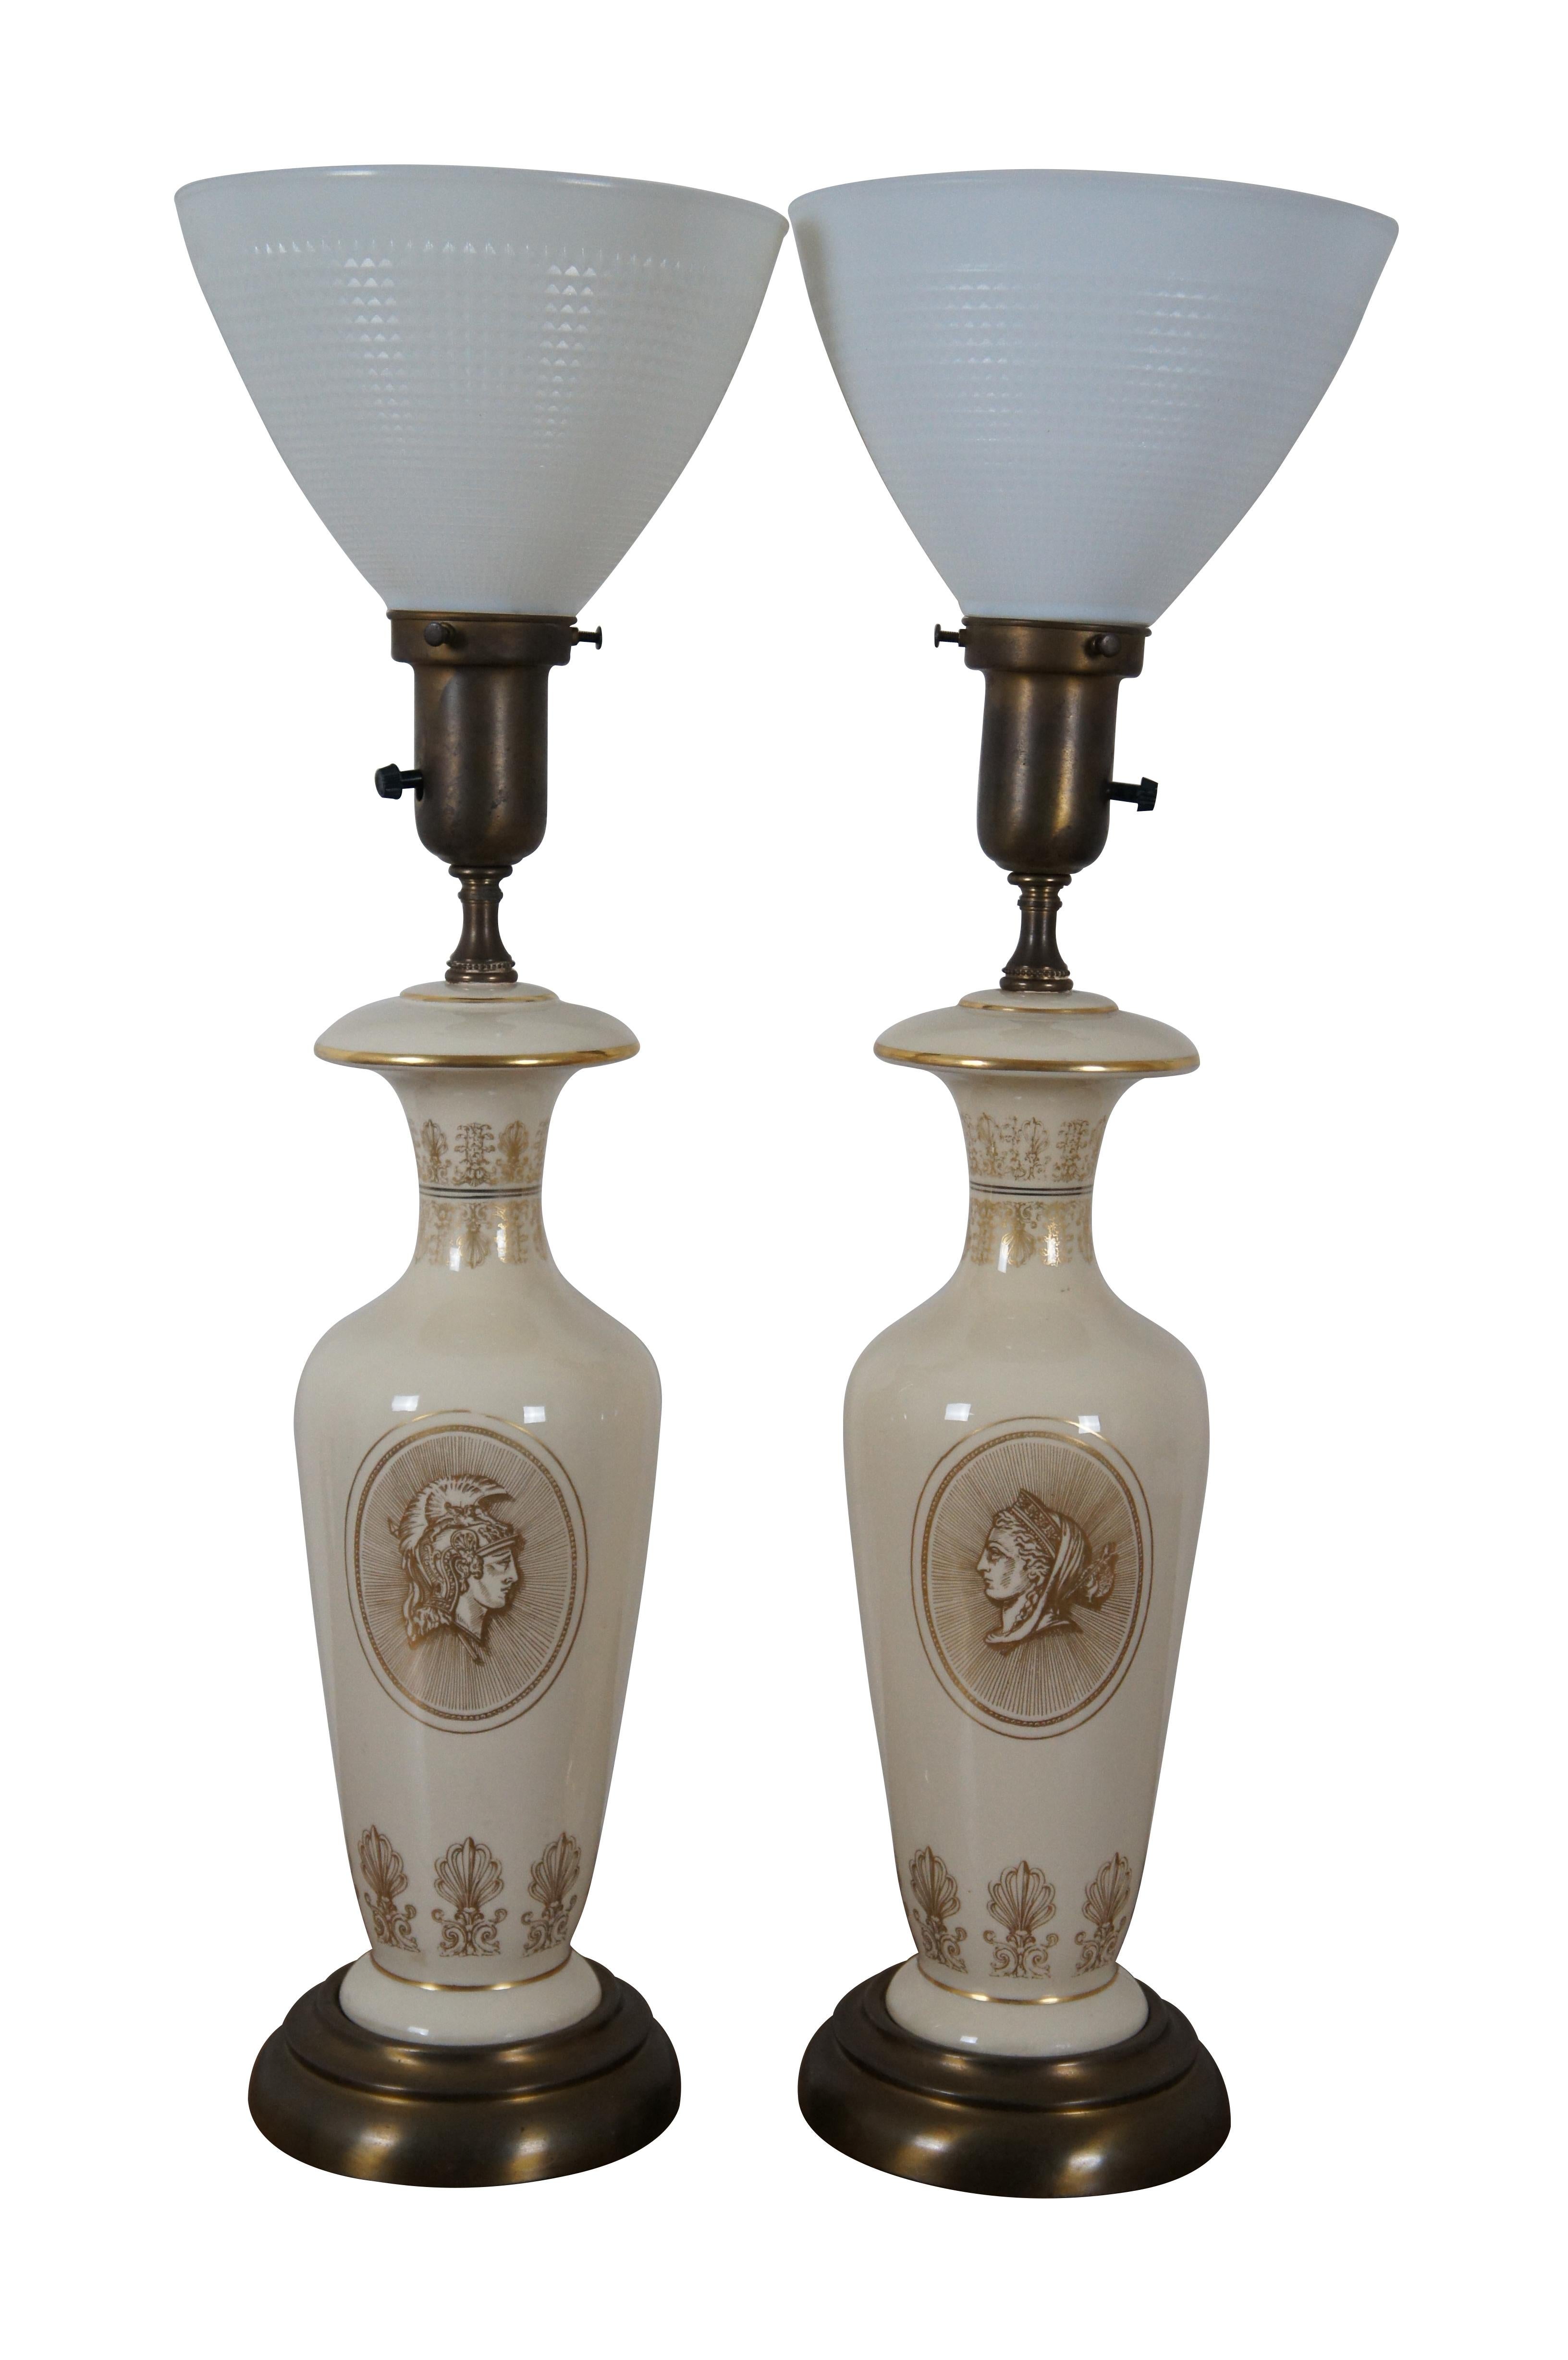 Pair of vintage off-white porcelain mantel urn table lamps with brass bases, stenciled with neoclassical motifs including the heads of a Roman / Greek soldier and noblewoman. Topped with waffle-textured milk glass torchiere up light shades and